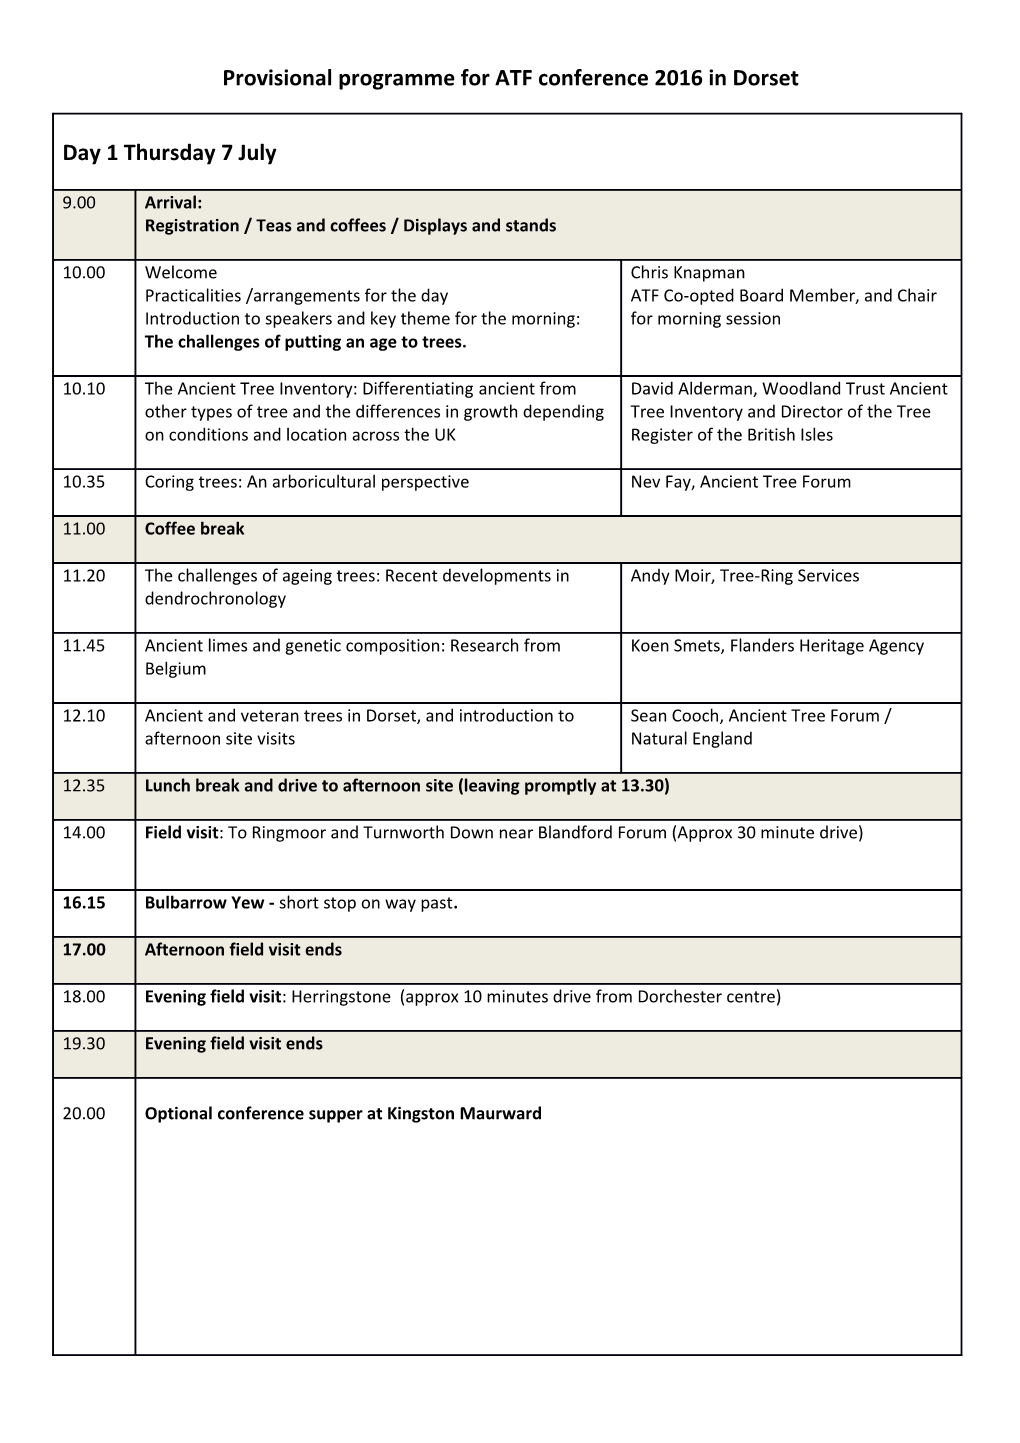 Provisional Programme for ATF Conference 2016 in Dorset